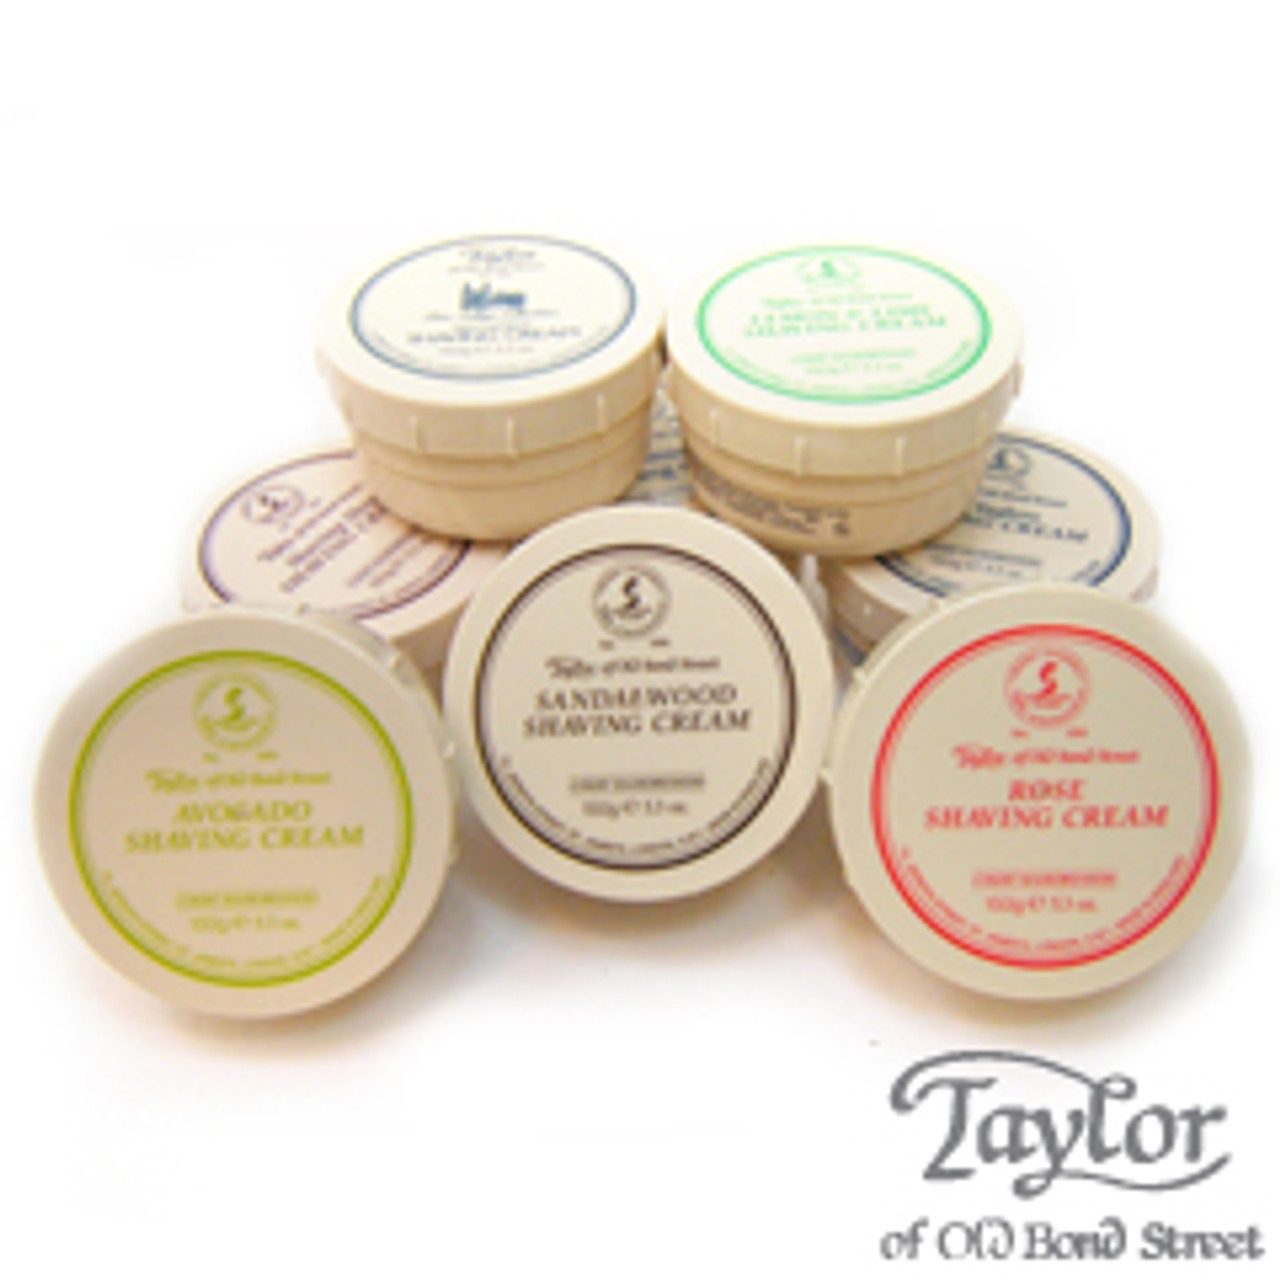 Taylors of Old Bond Street Royal Forest Shaving Cream in a Bowl